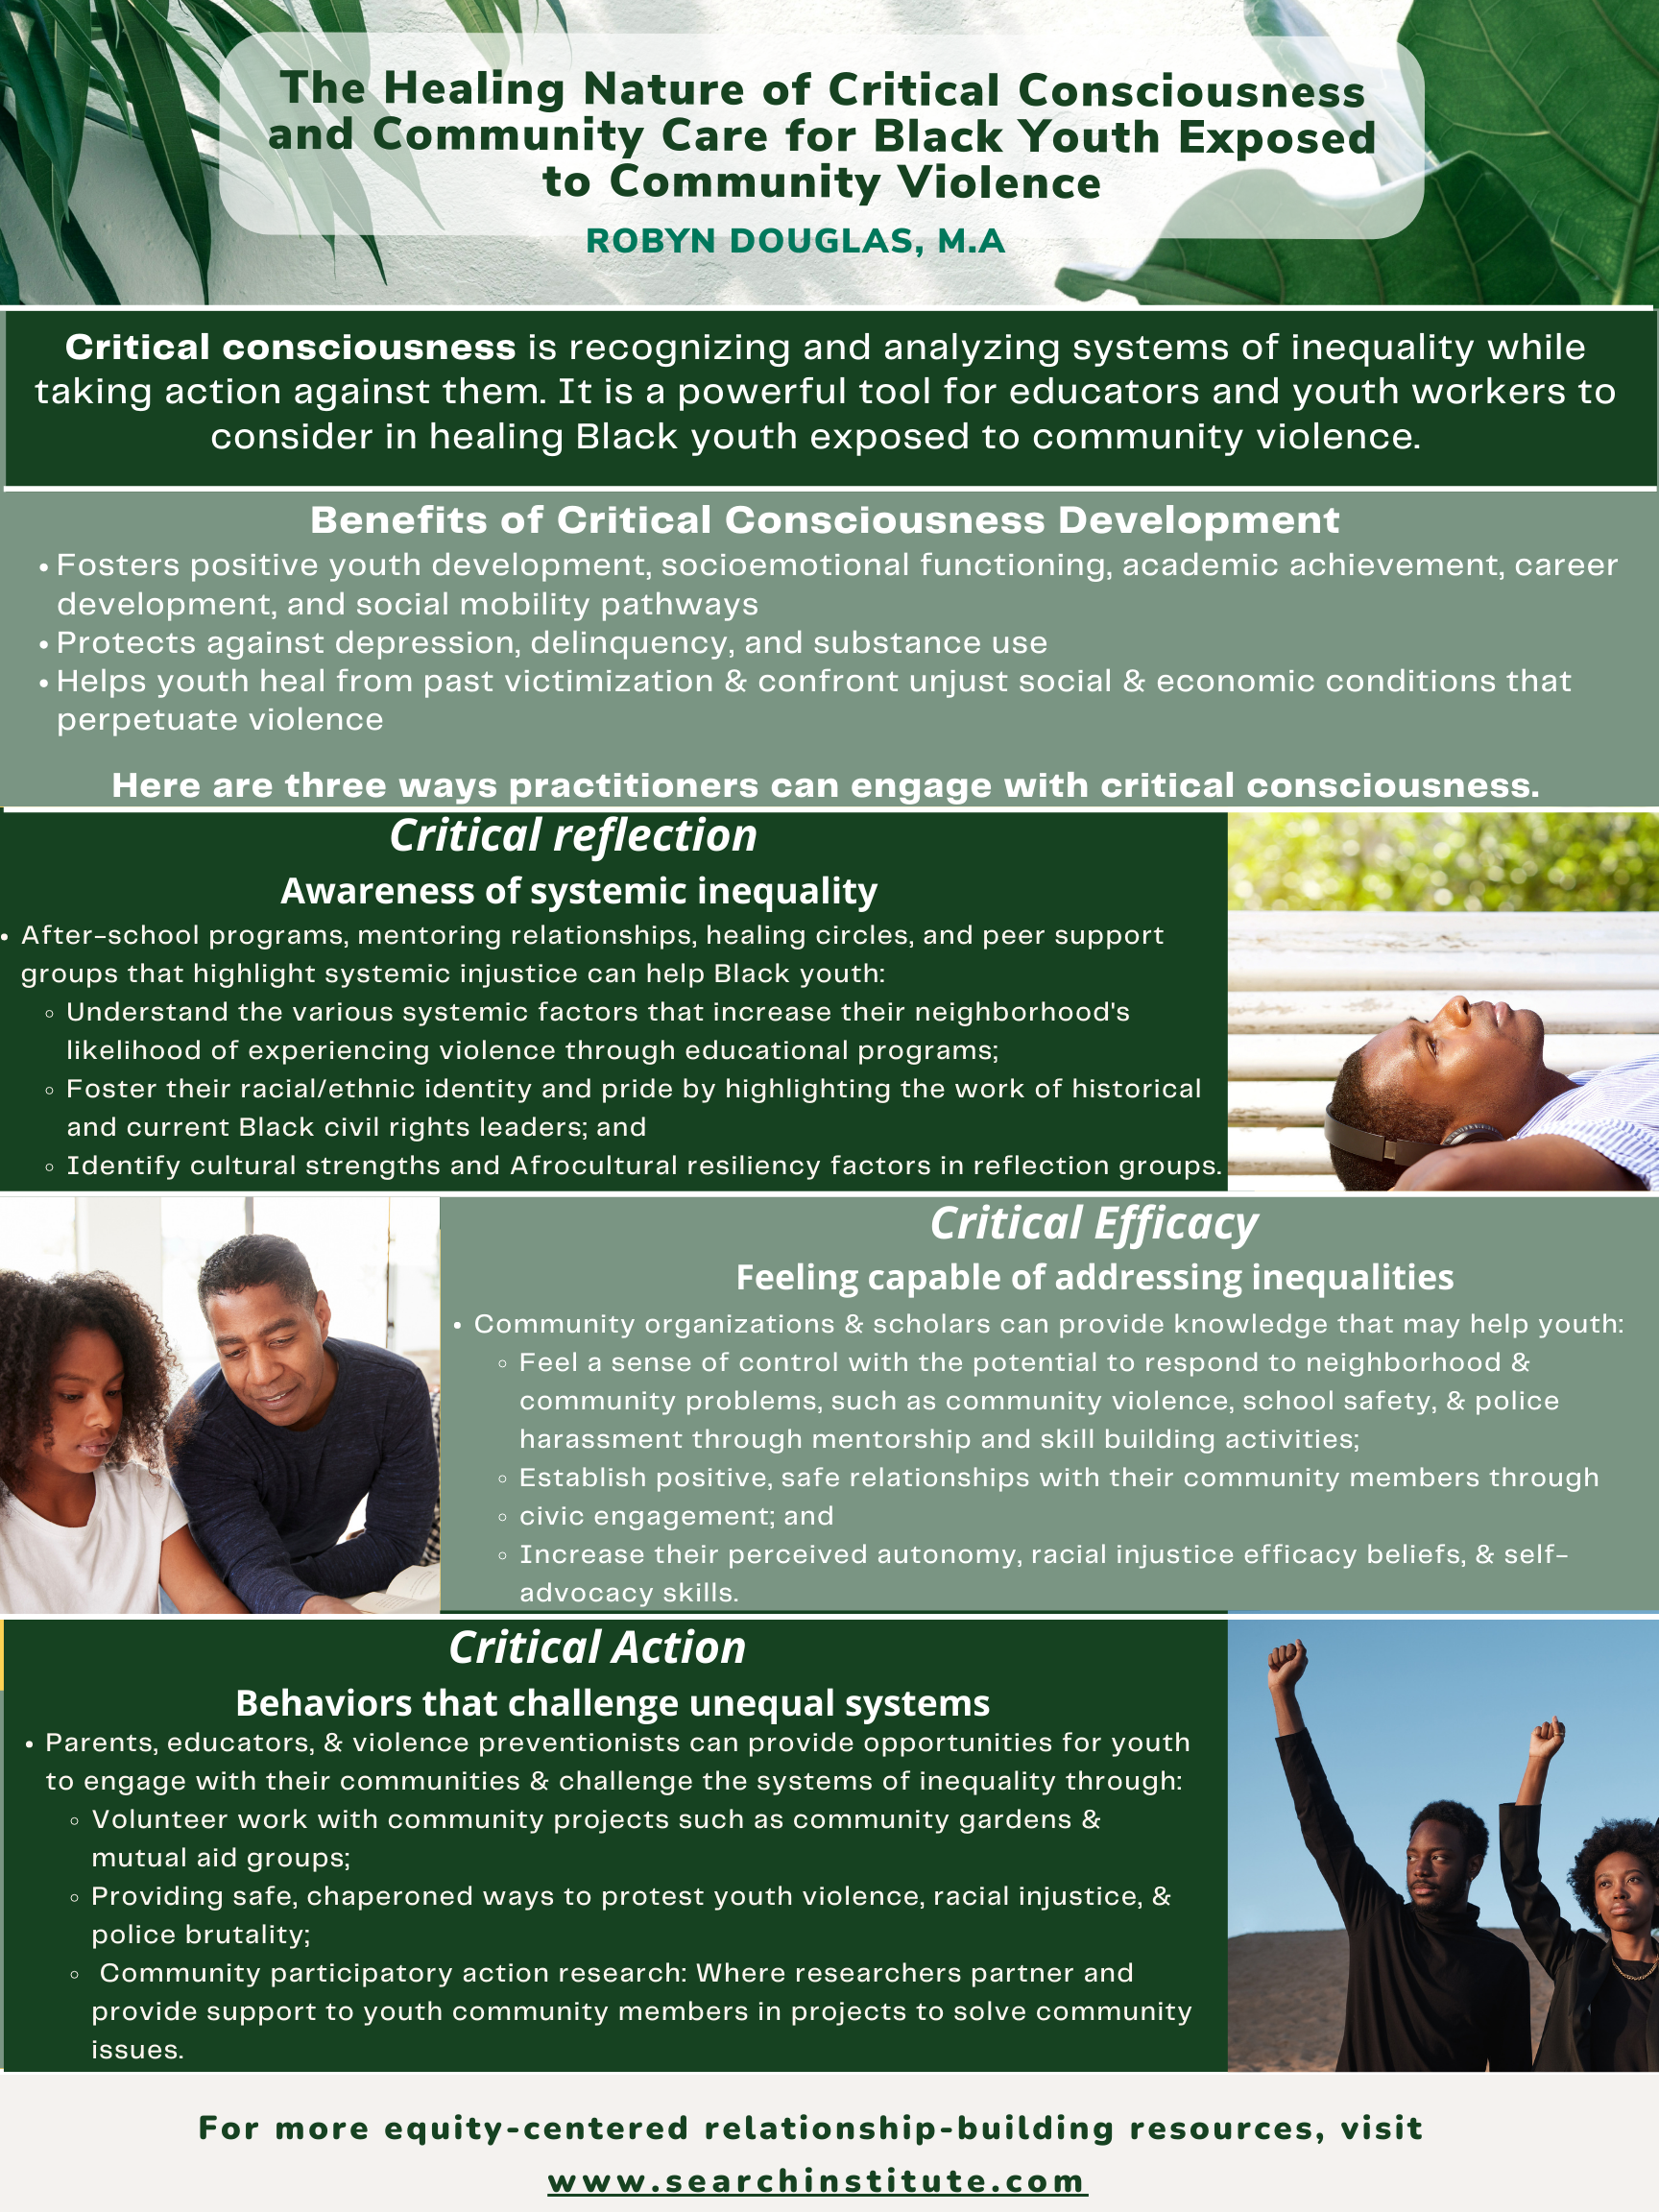 The Healing Nature of Critical Consciousness Development and Community Care for Black Youth Exposed to Community Violence (11)